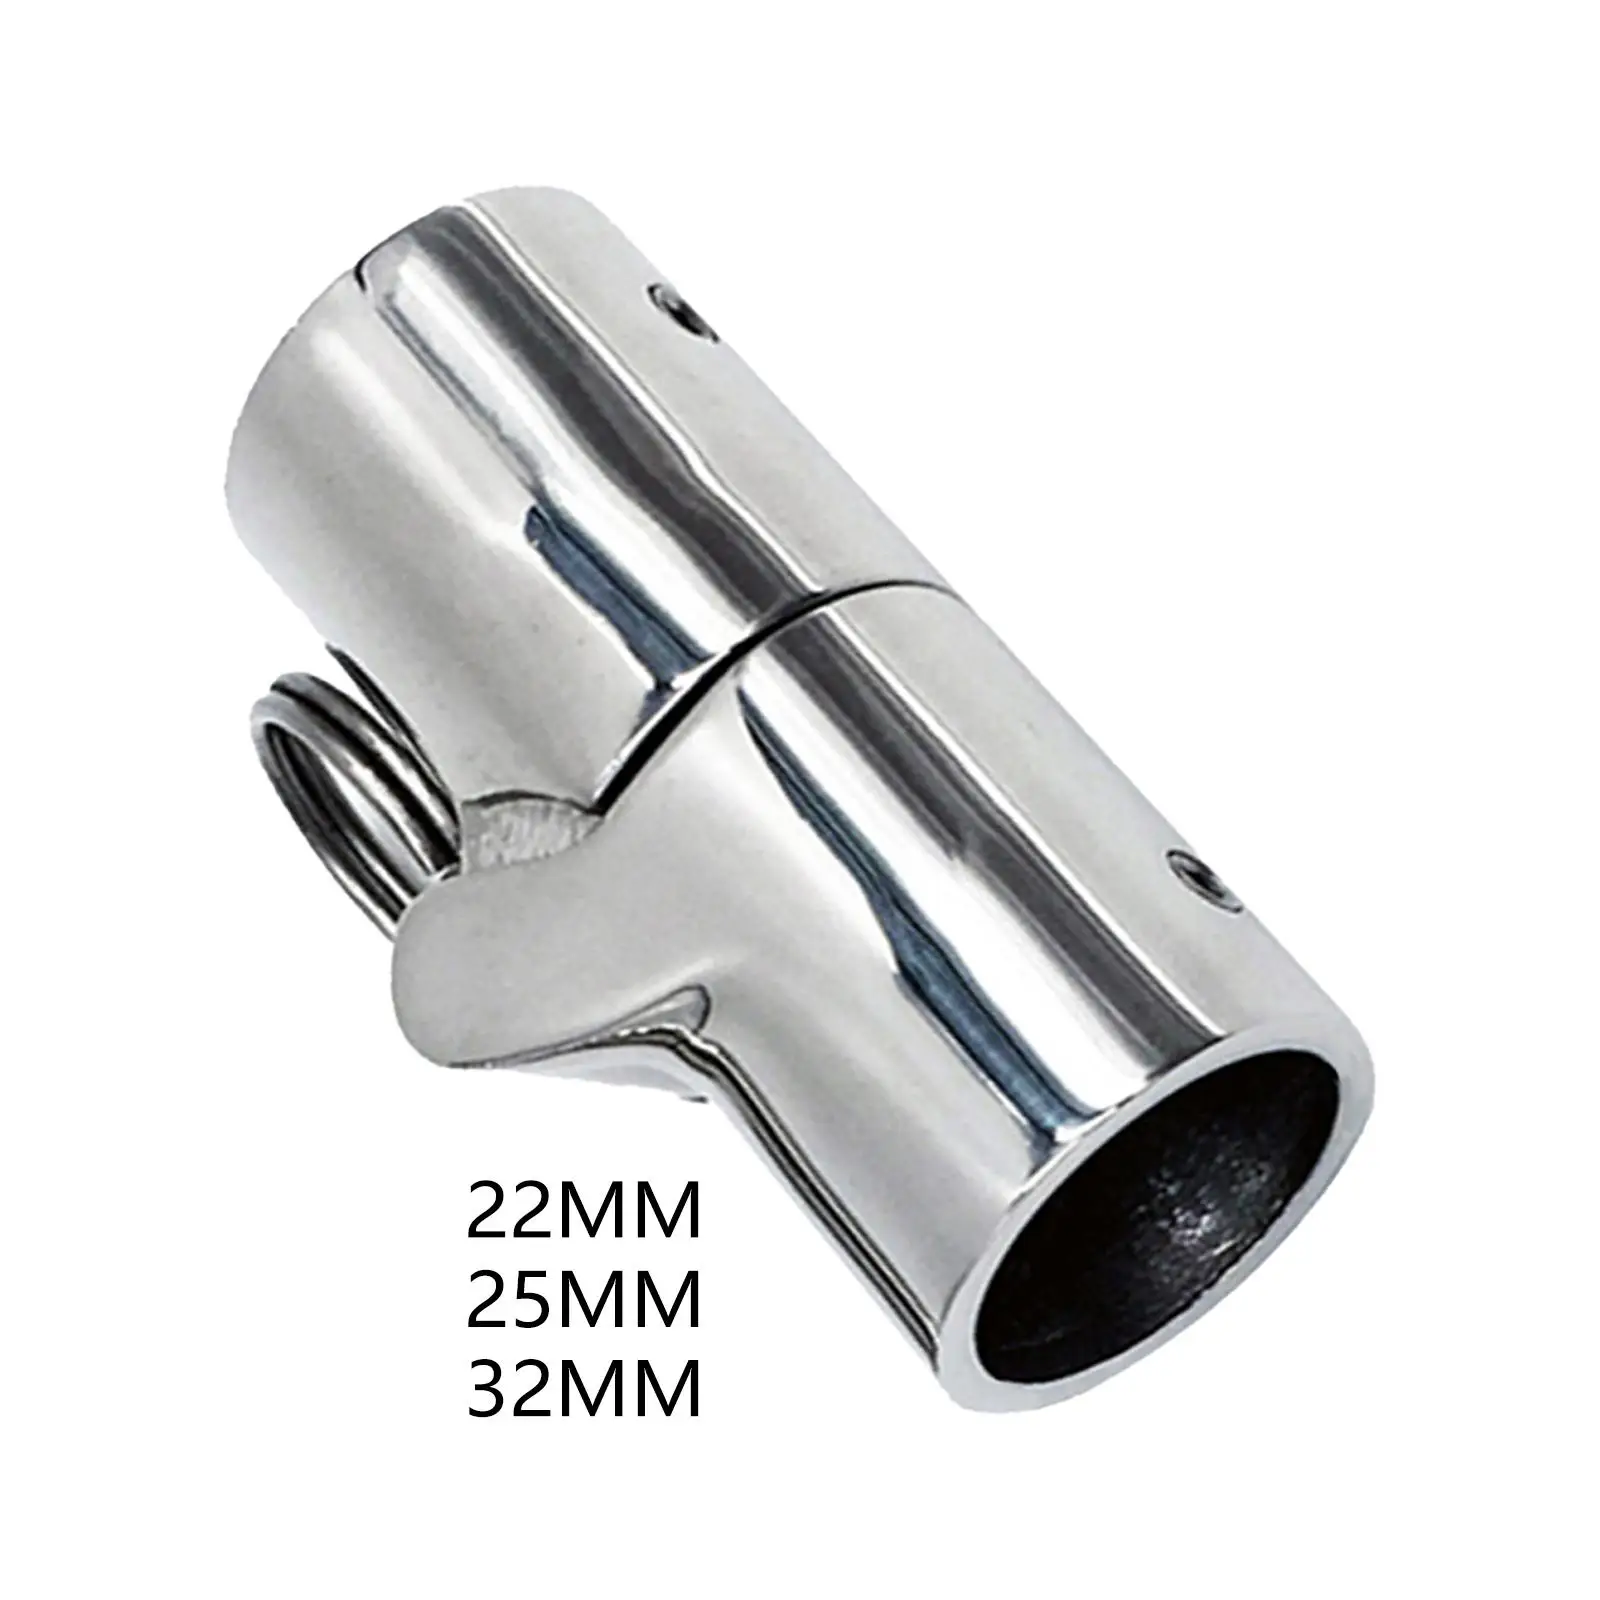 Marine Stainless Steel Folding Swivel Coupling Tube Pipe Connector Boat Deck Hinge Mount Connector Boat Hardware Fitting